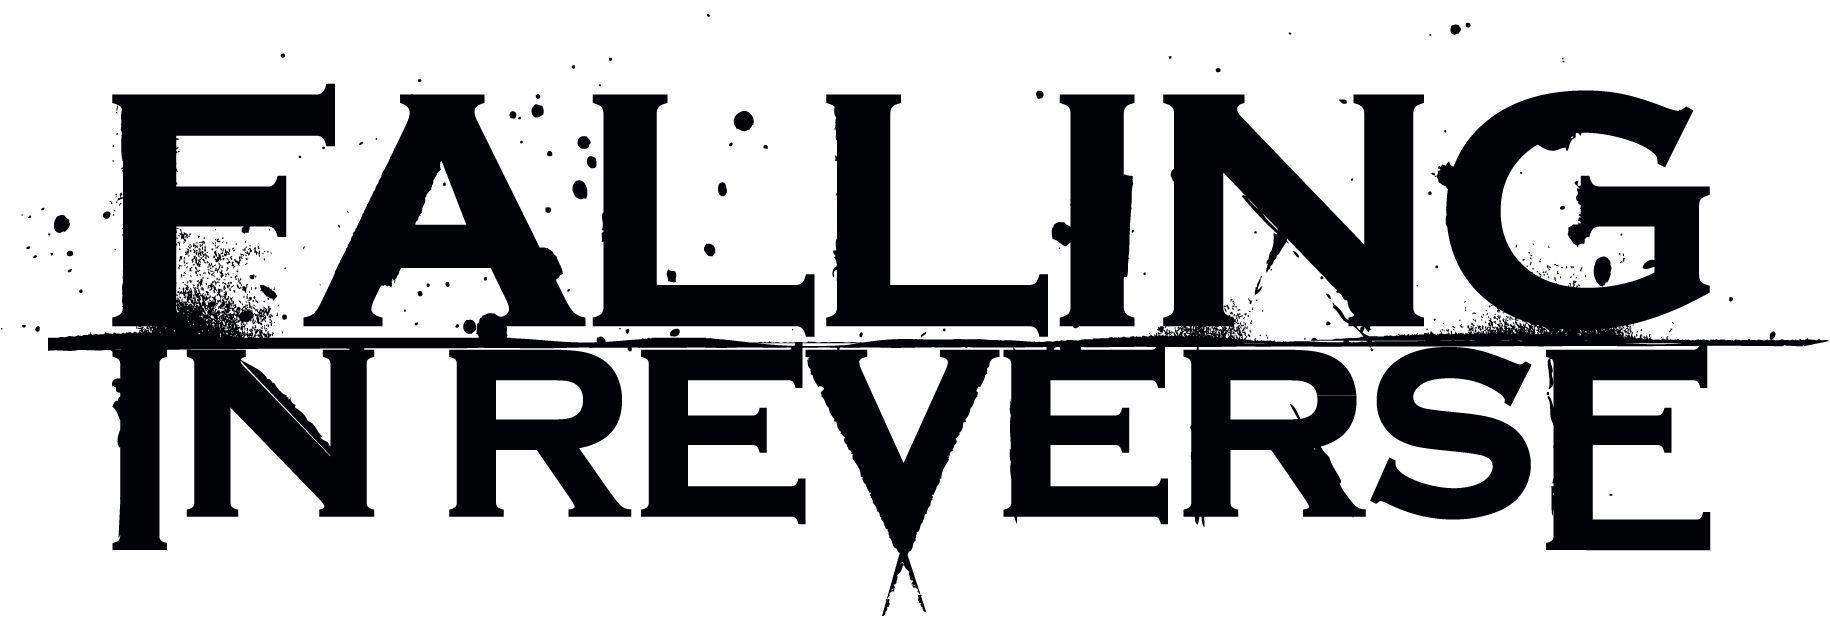 image about Falling In Reverse